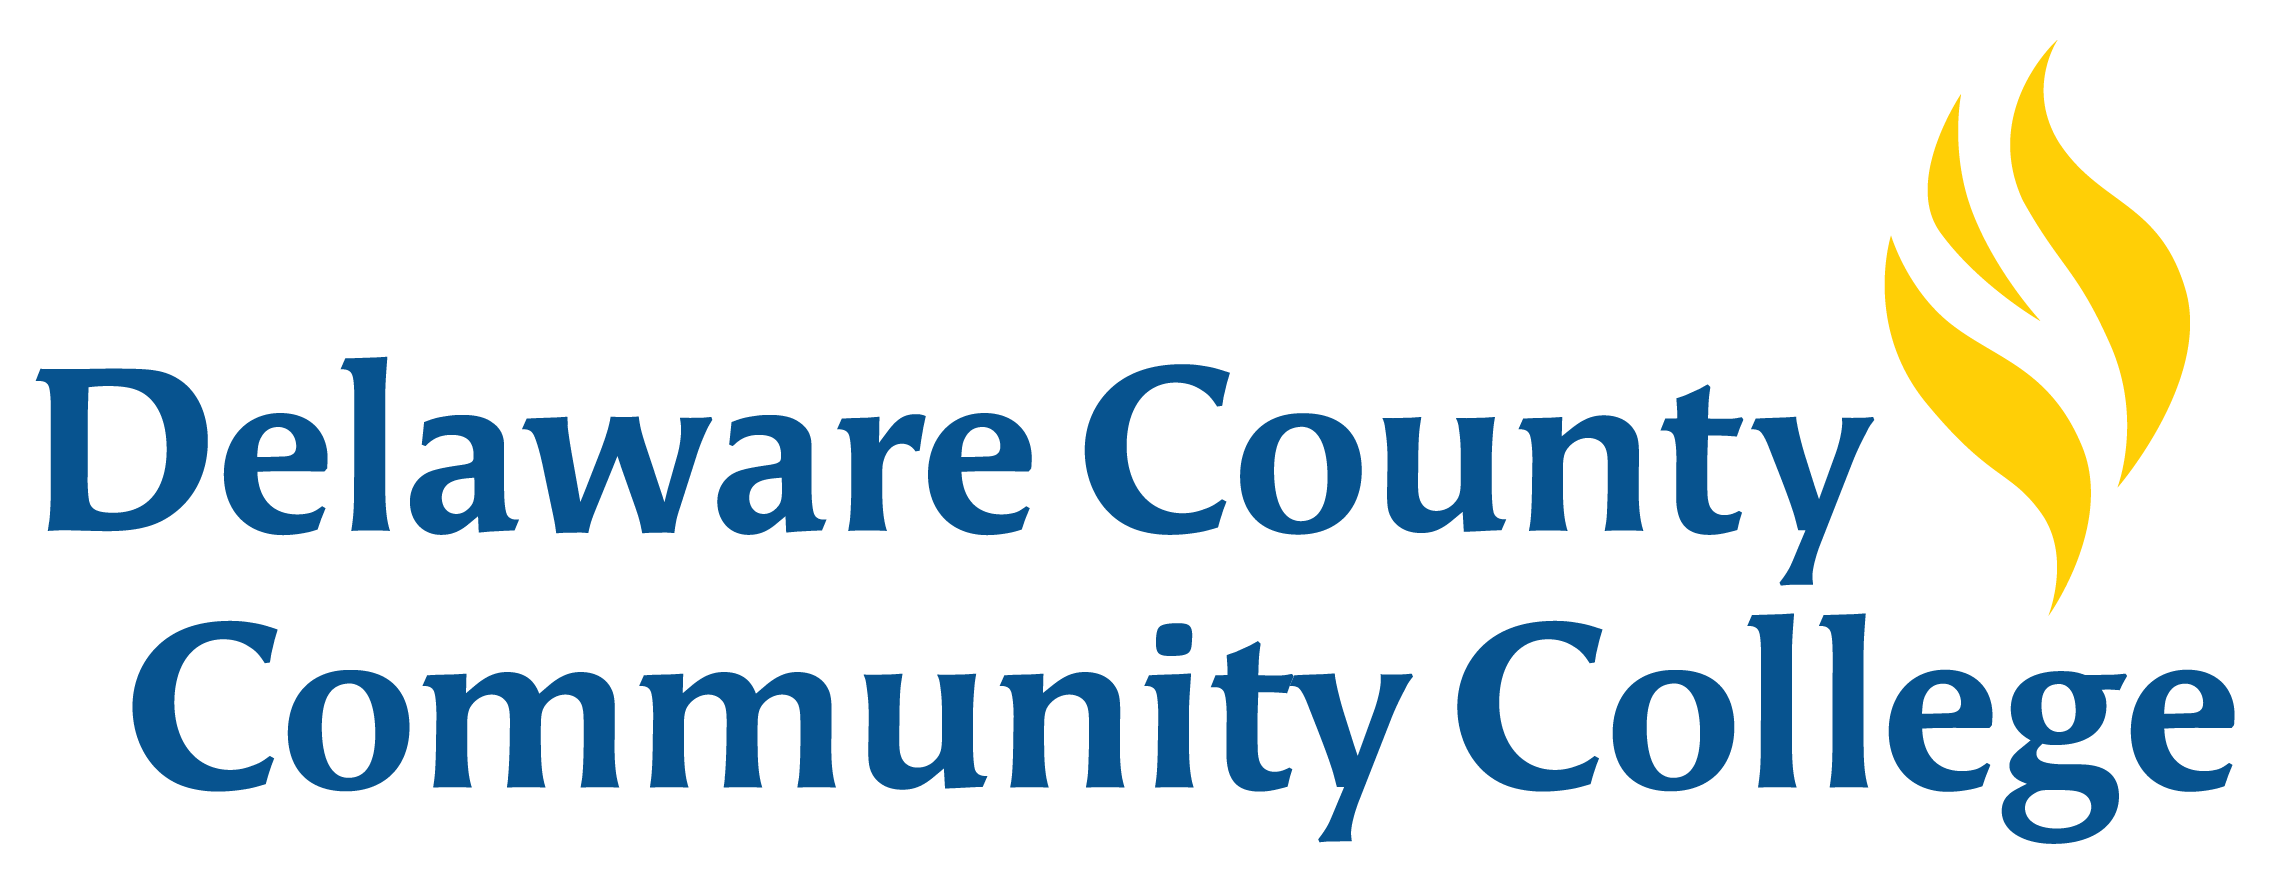 Associate Degree in Mathematics and Natural Science | Associate's degree | Science | Blended Learning | 2 years | Delaware County Community College (DCCC) | USA